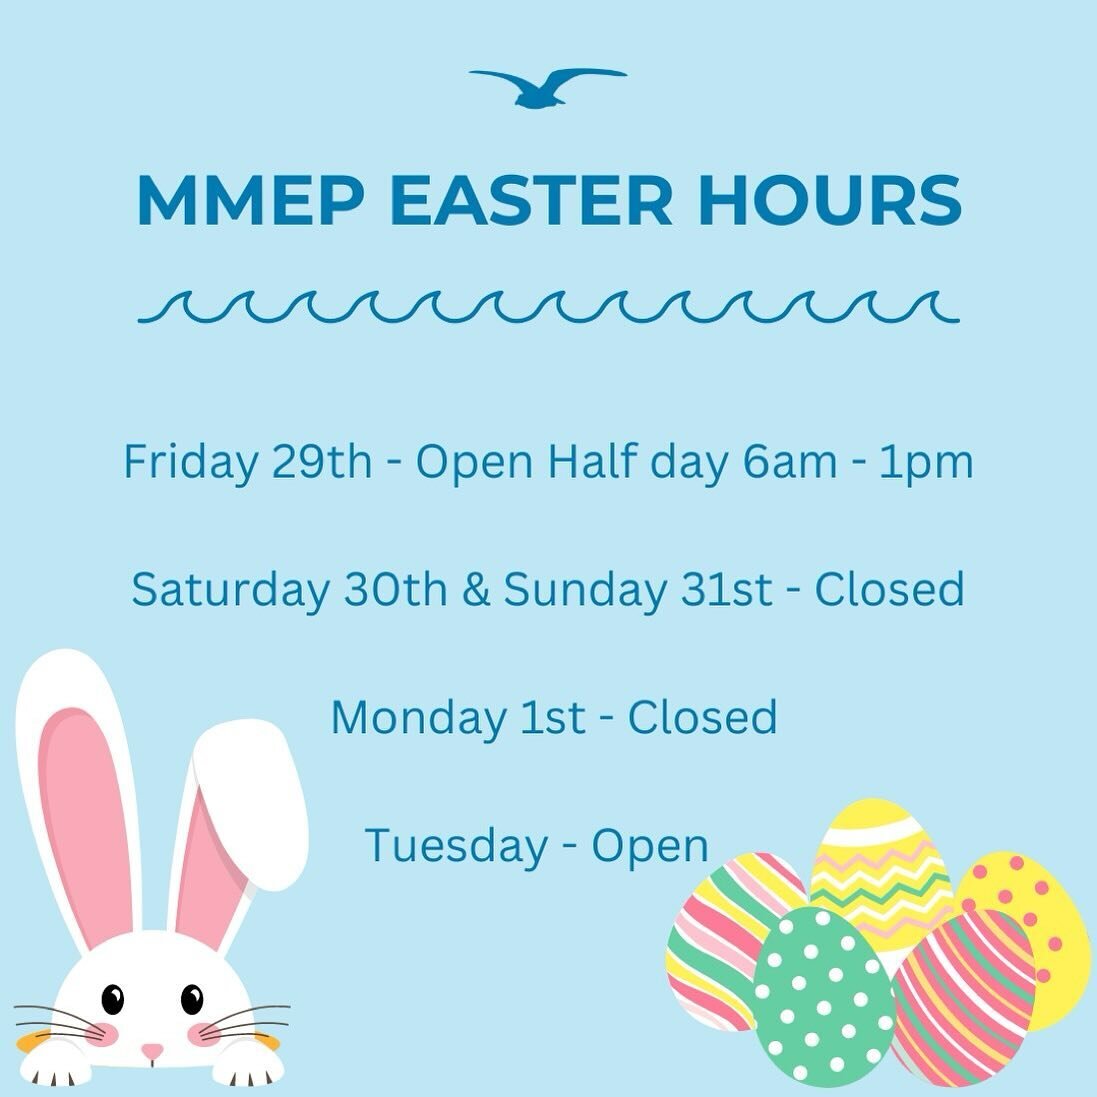 Our opening hours are going to be slight different over Easter. Friday will be a half day with all classes running normally. Then we will be shut until Tuesday. We hope you all have a great well deserved break and we look forward to seeing you when y